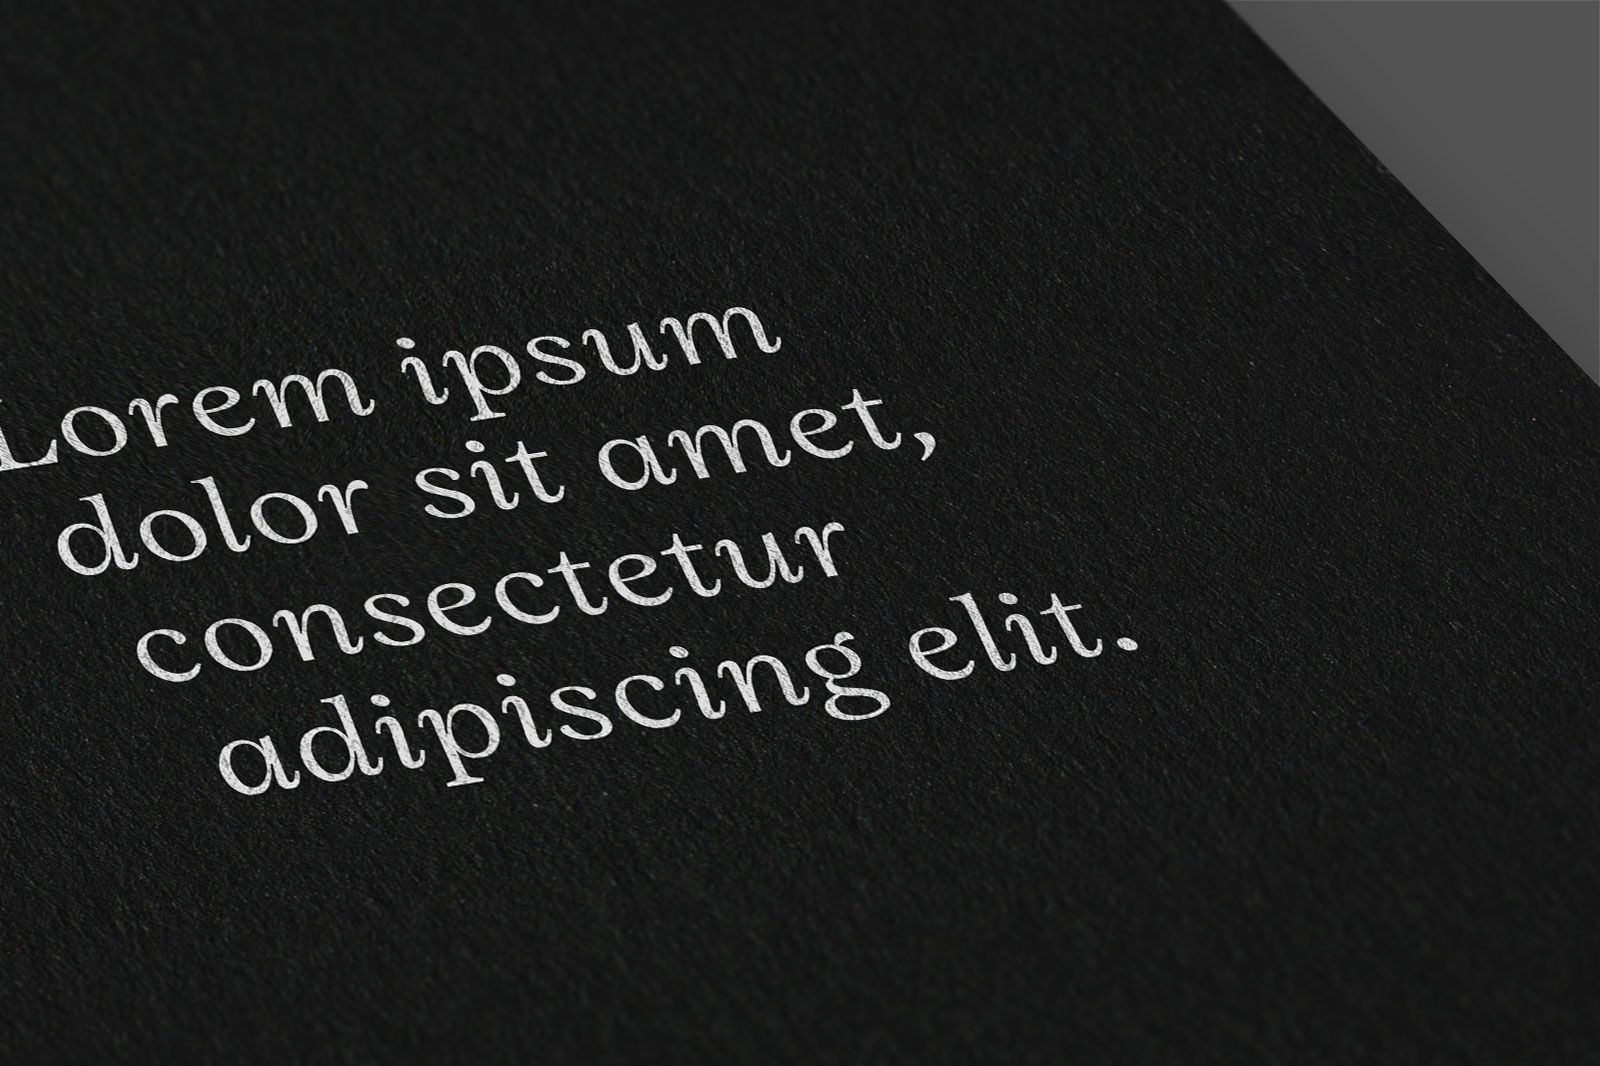 Sirio black black: Type: Natural
Surface: smooth slightly rough
Thickness: from 70 to 700 gr
Uses: ideal for printing luxury business cards, original invitations,
Producer: Fedrigoni